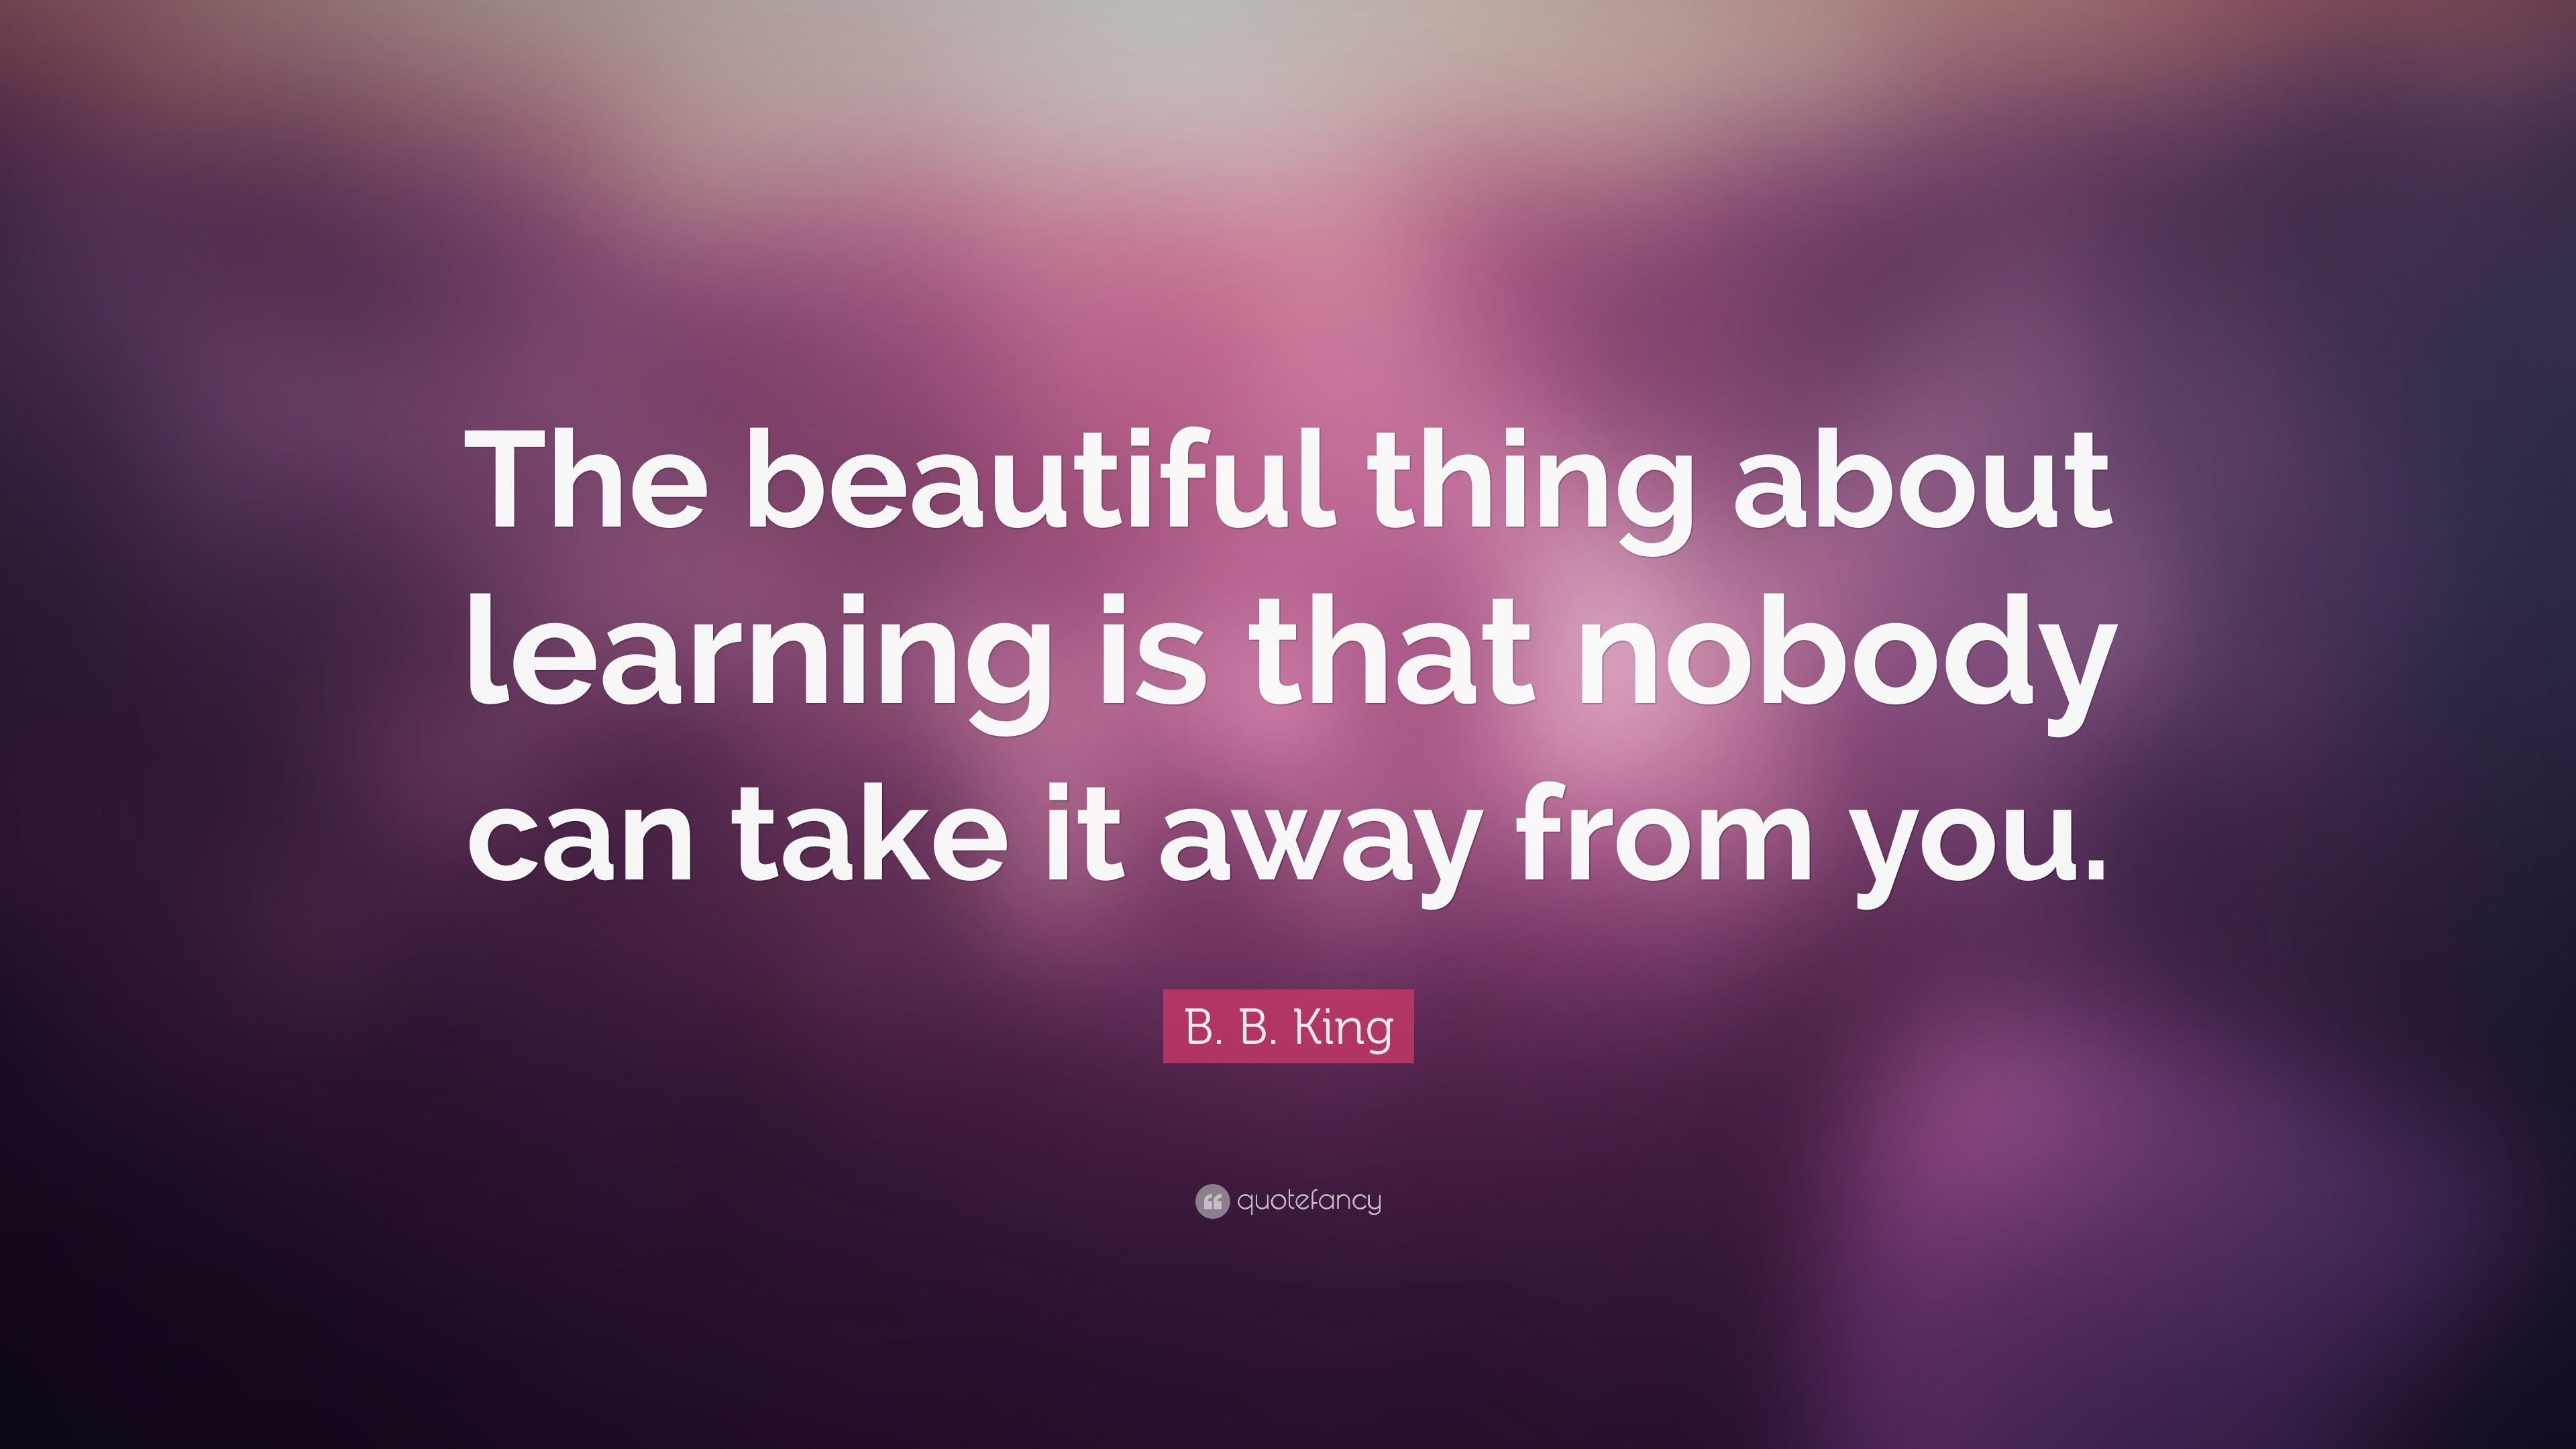 B. B. King Quote: “The beautiful thing about learning is that nobody